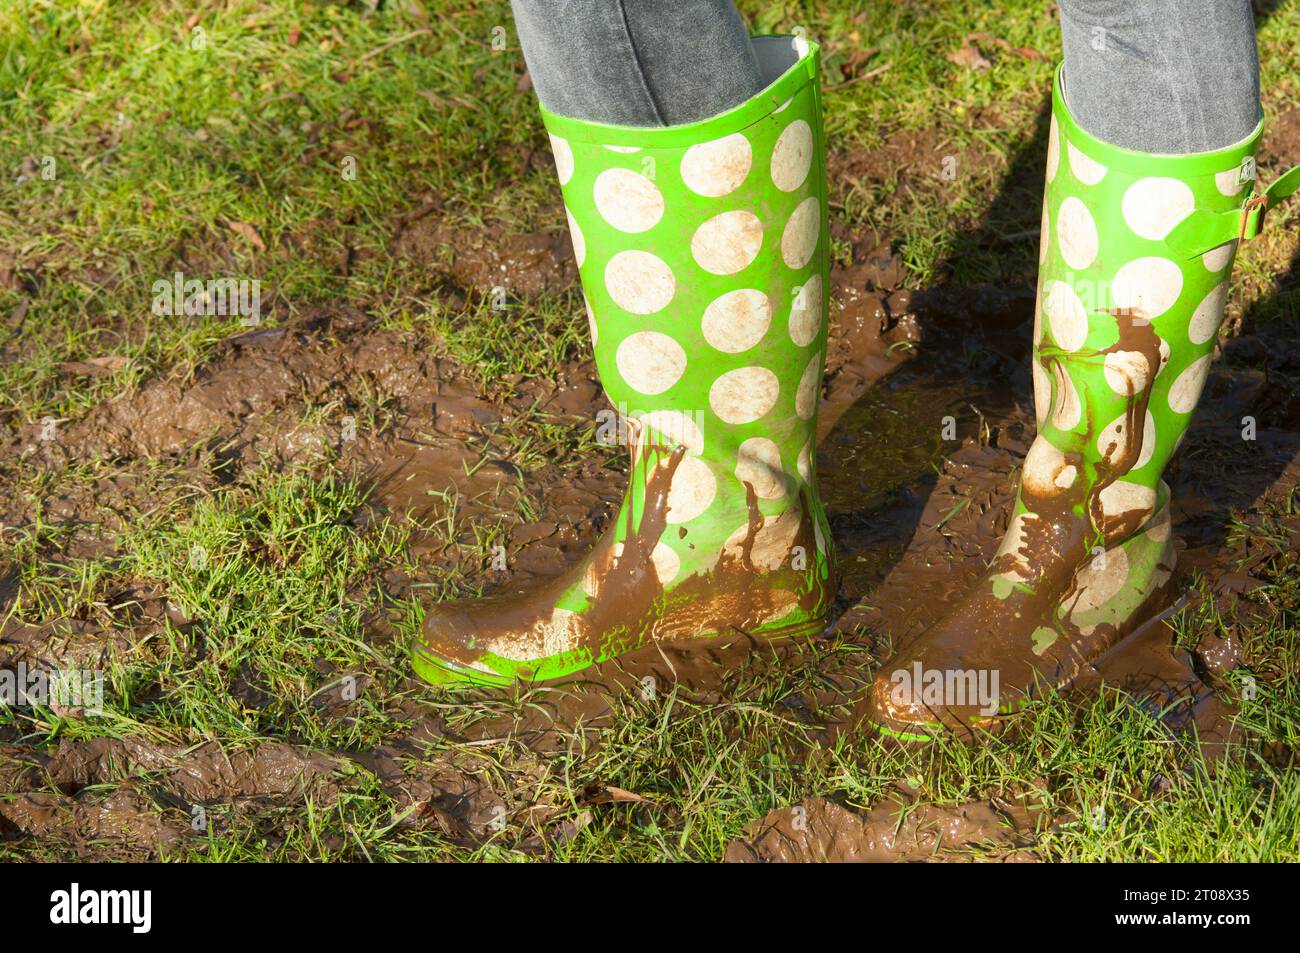 Close-up of green polka dot green wellington boots in very muddy conditions - John Gollop Stock Photo